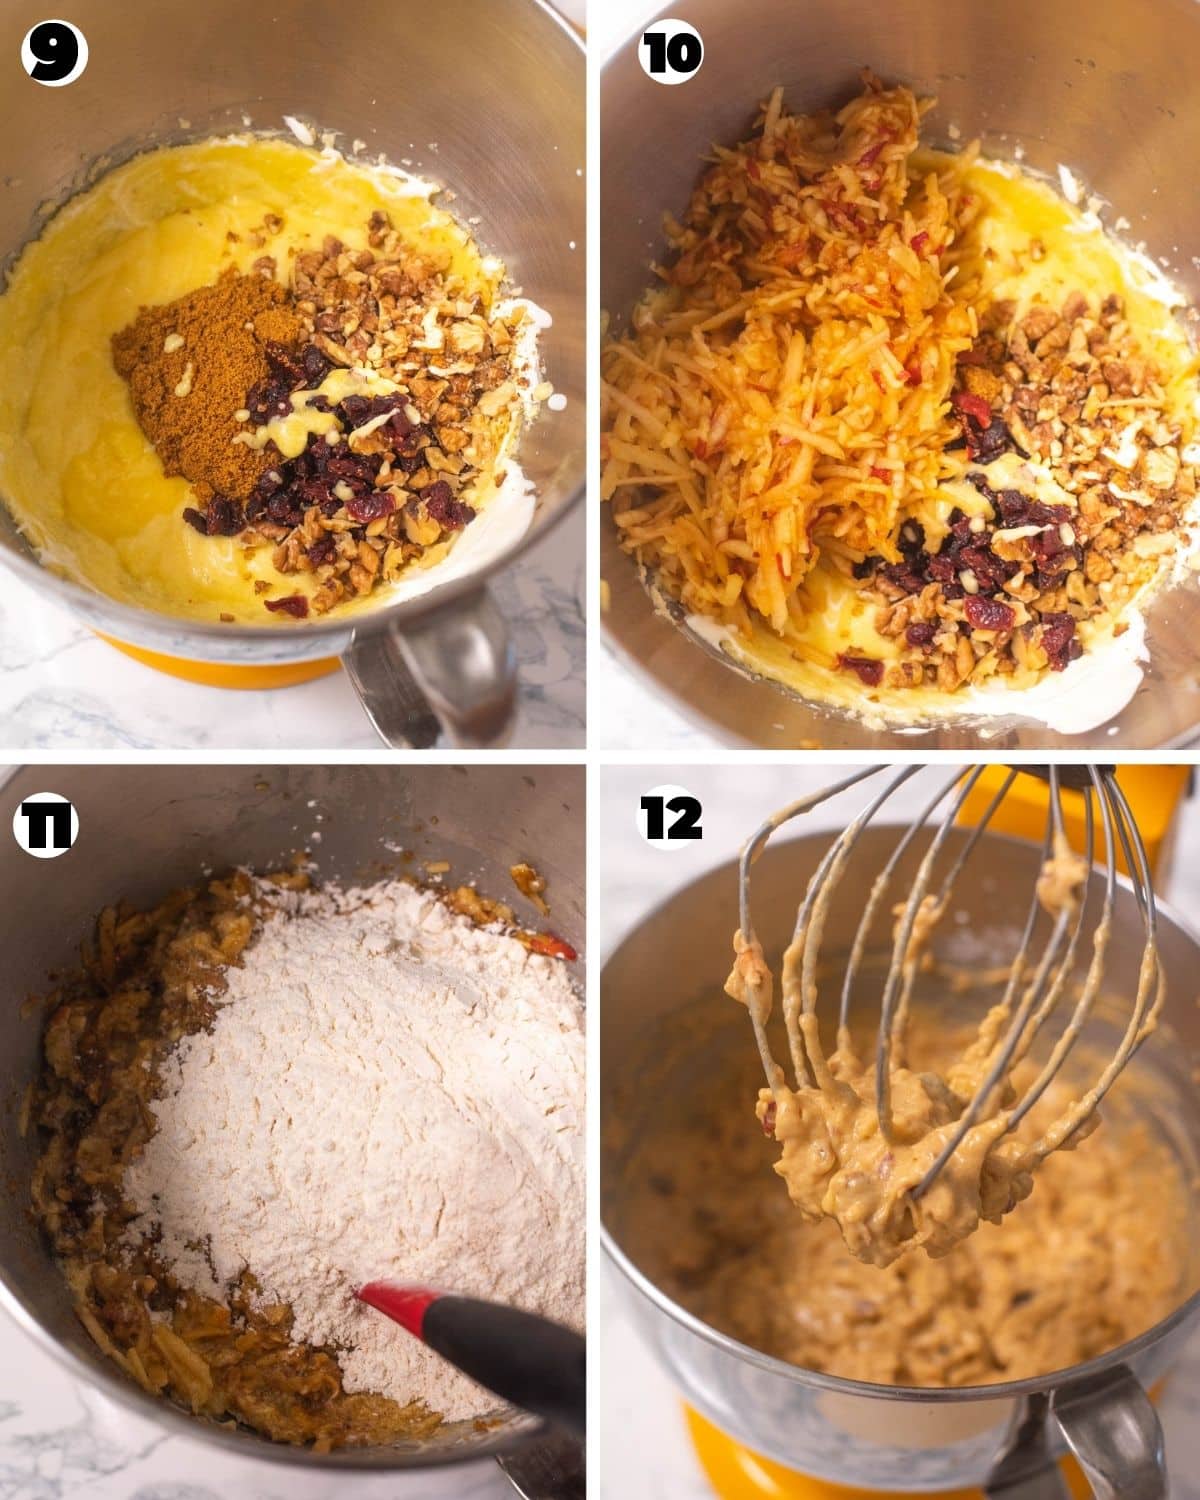 Collage that shows adding of fruits, nuts and dry ingredients to the batter